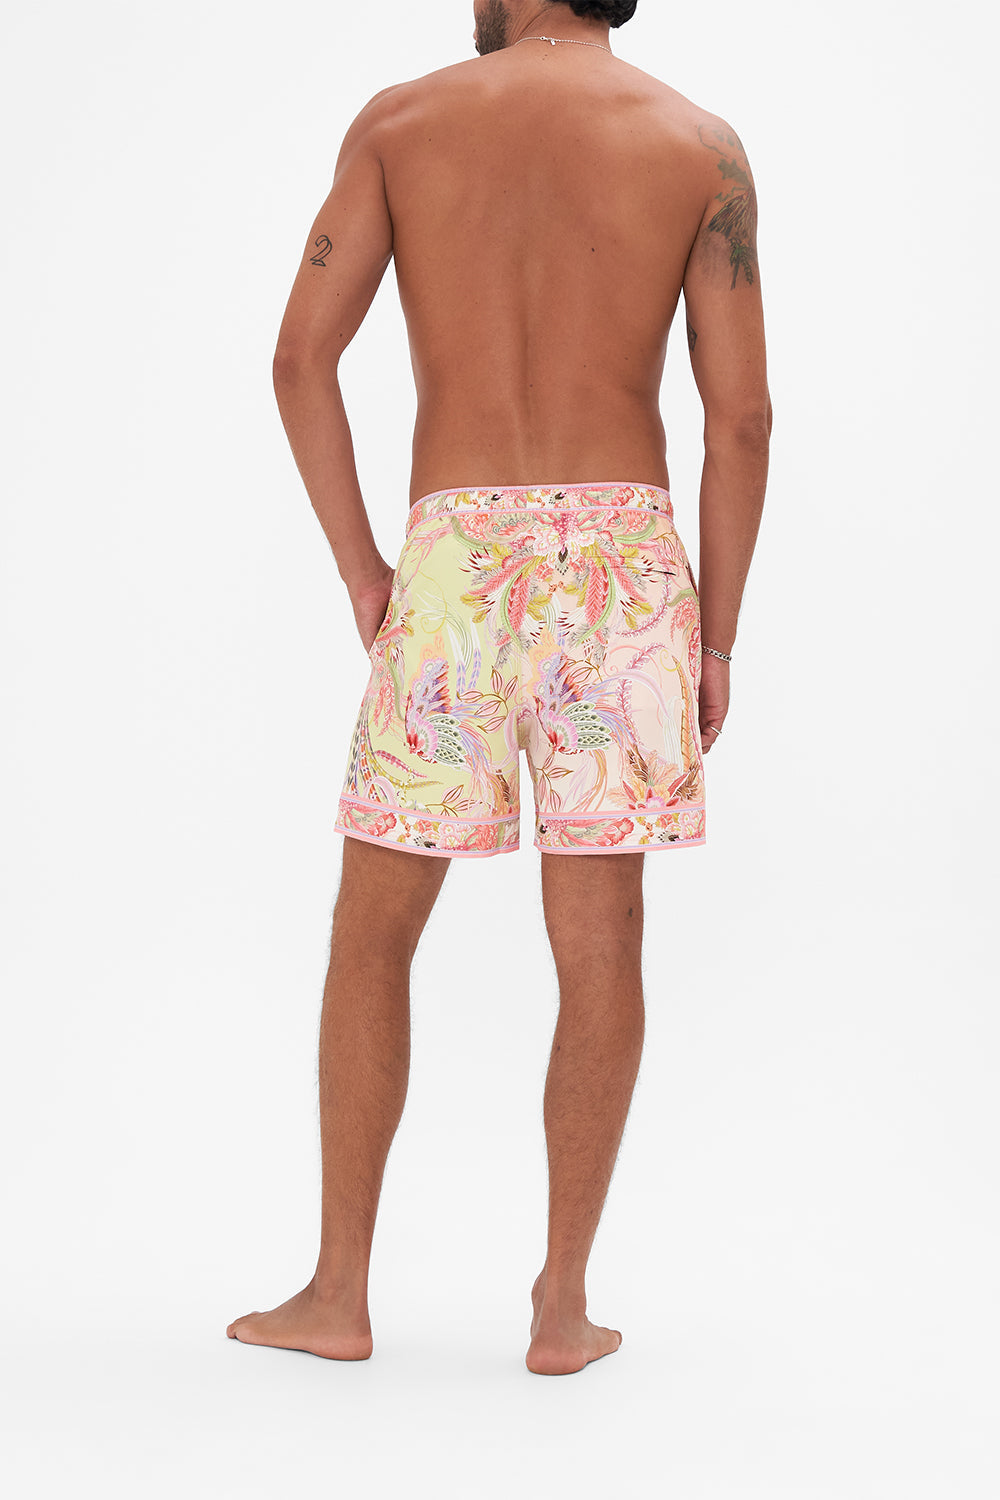 Back view of model wearing Hotel Franks by CAMILLA mens luxury boardshorts in Cosmic Tuscan print